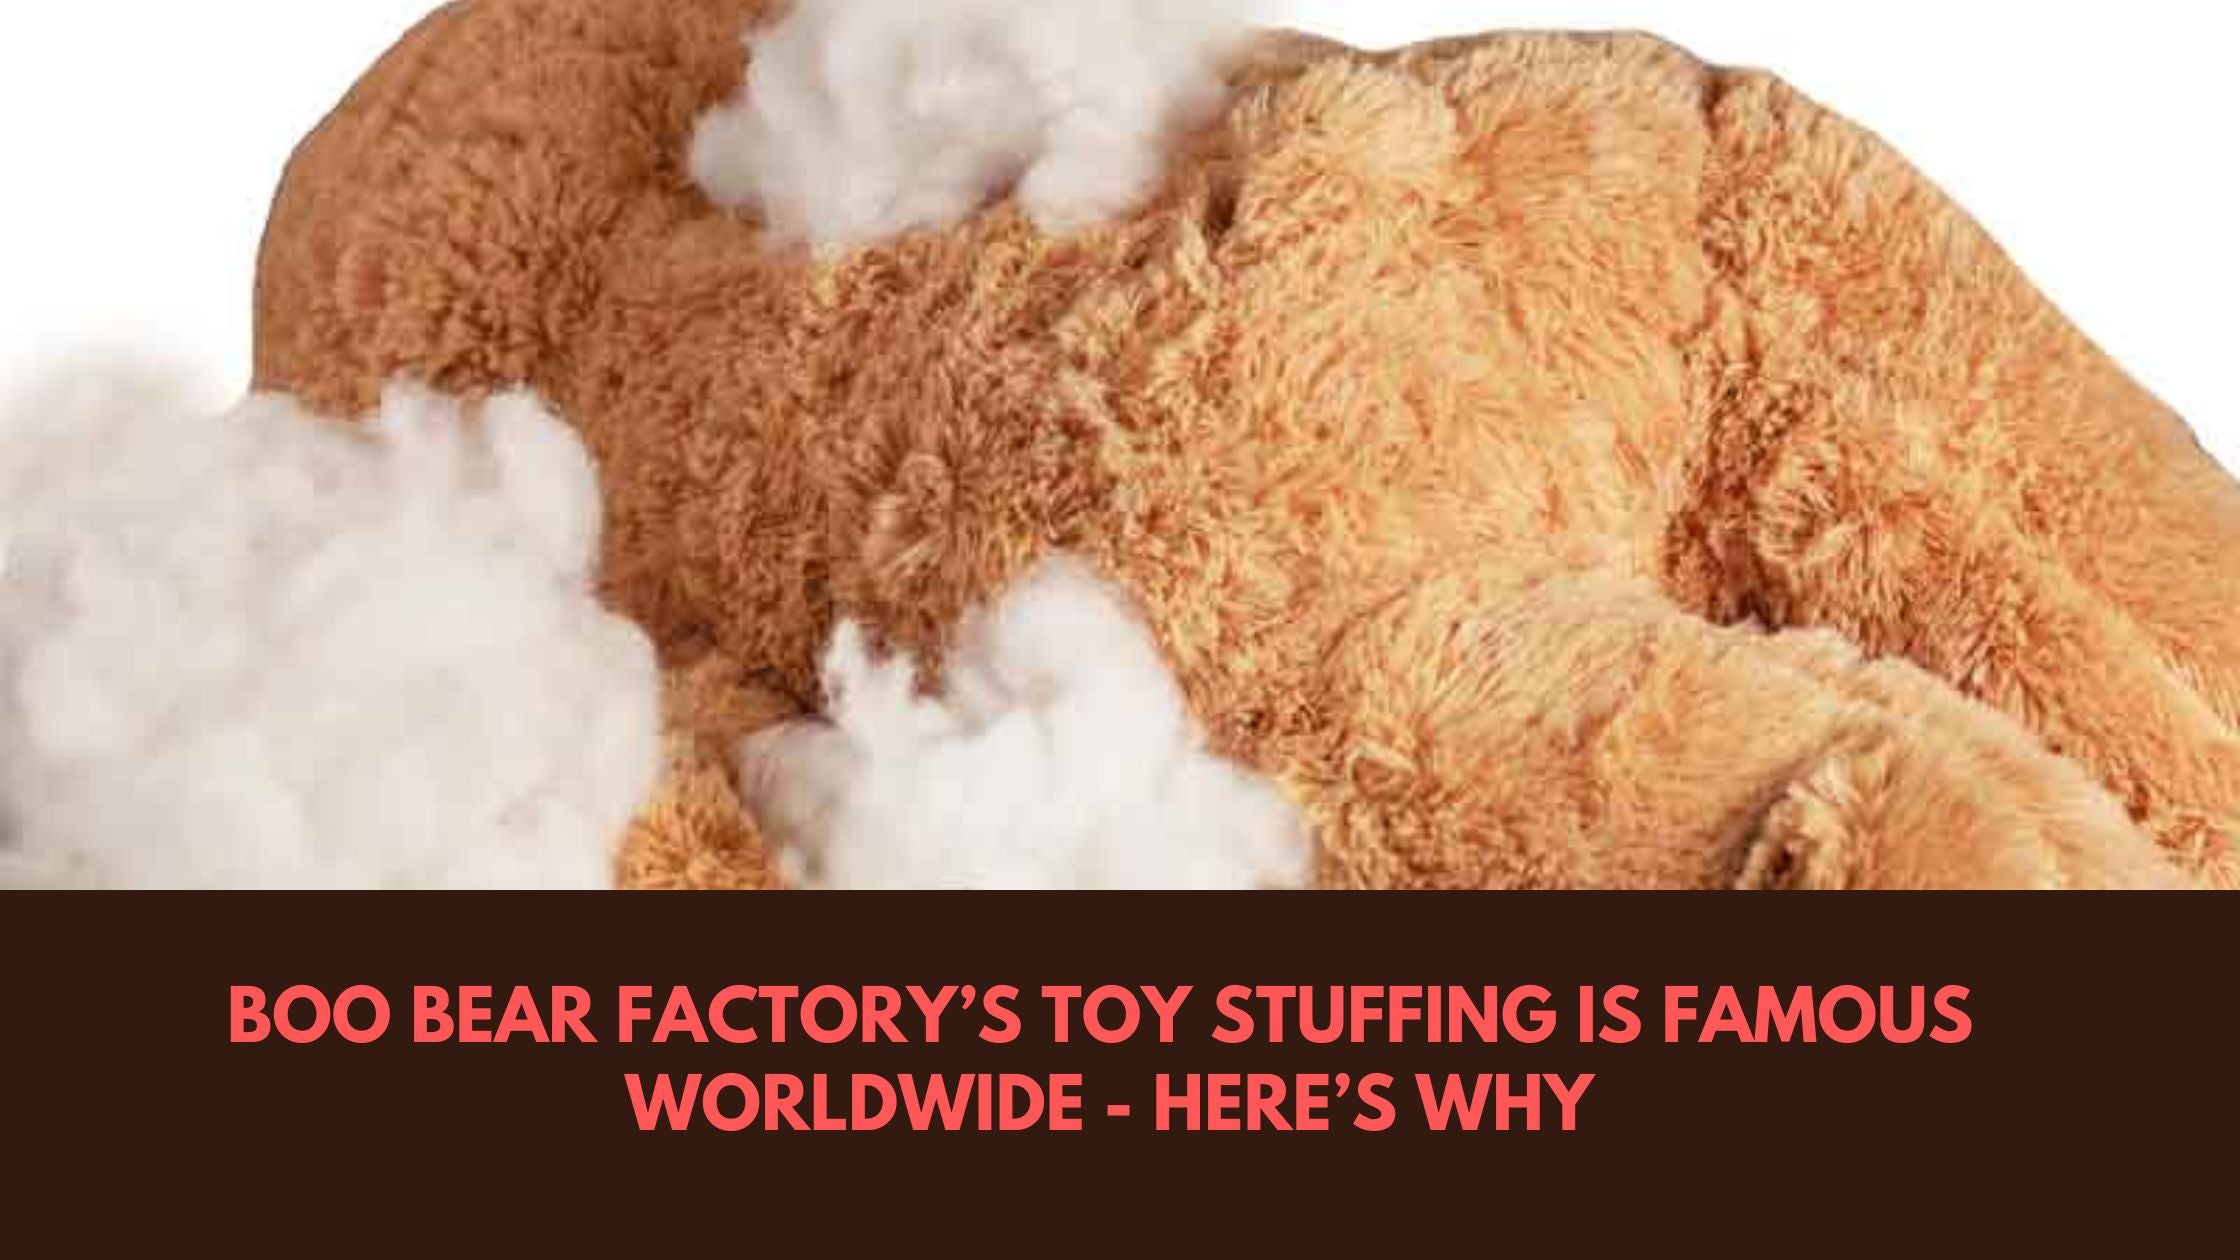 Boo Bear Factory’s Toy Stuffing is Famous Worldwide - Here’s Why